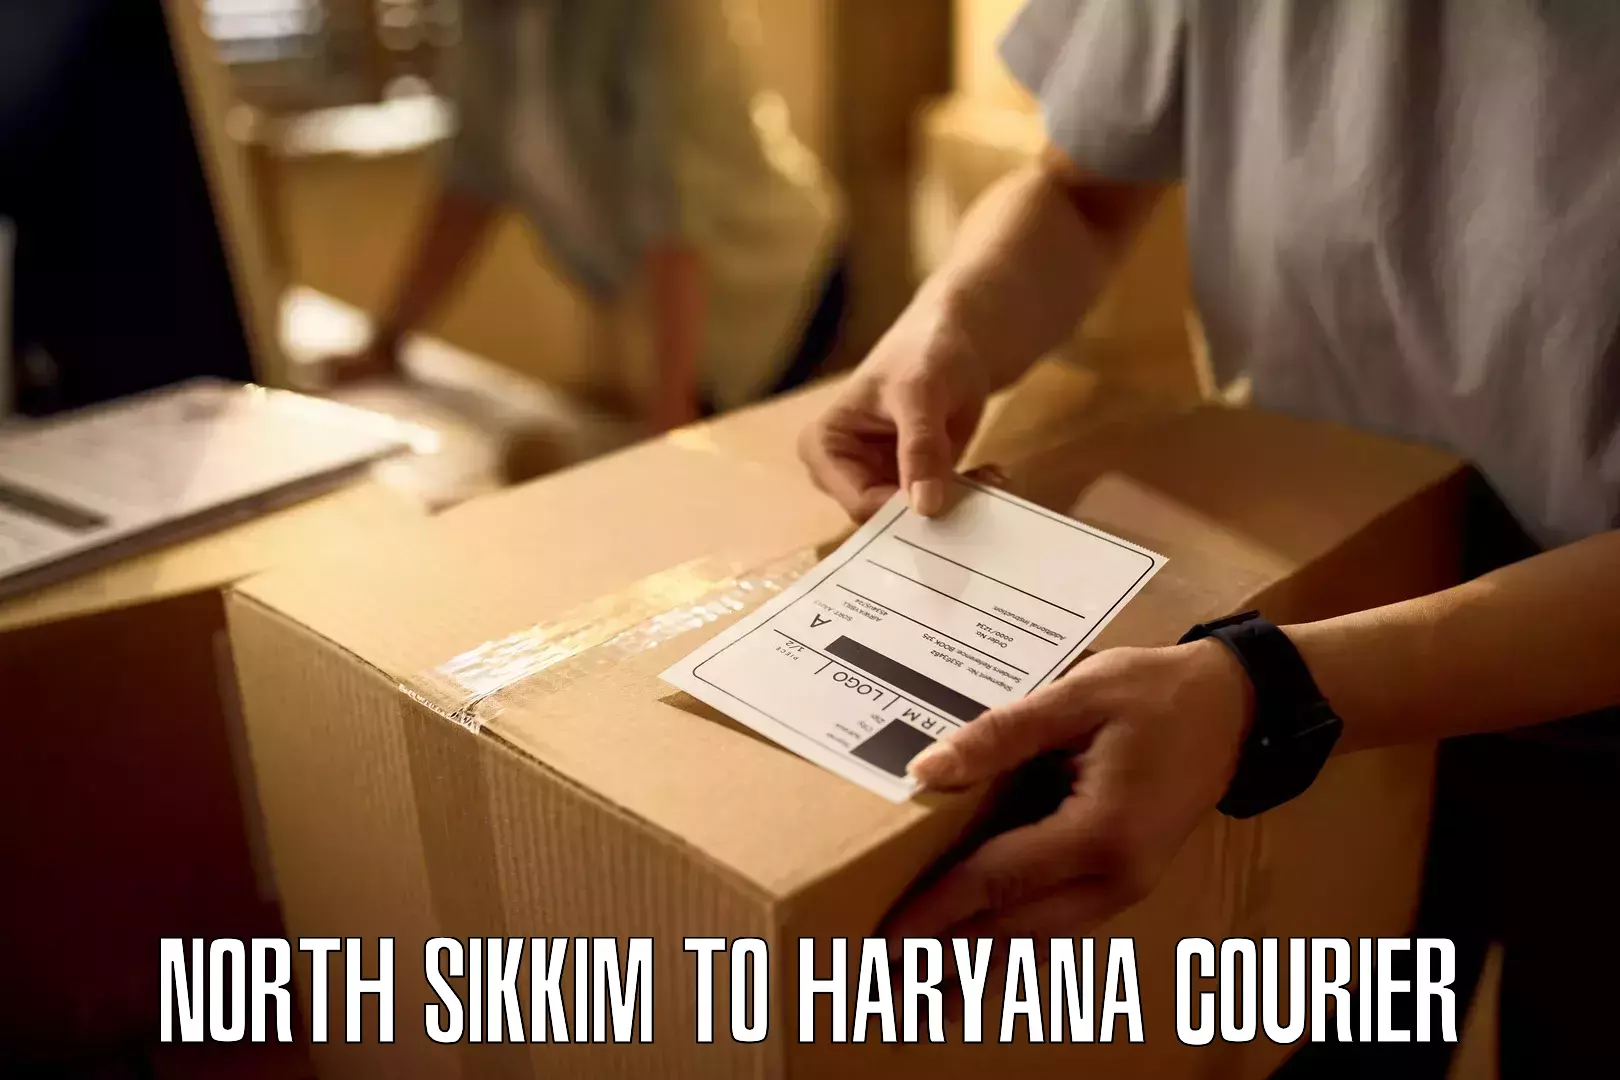 Small business couriers North Sikkim to Panipat